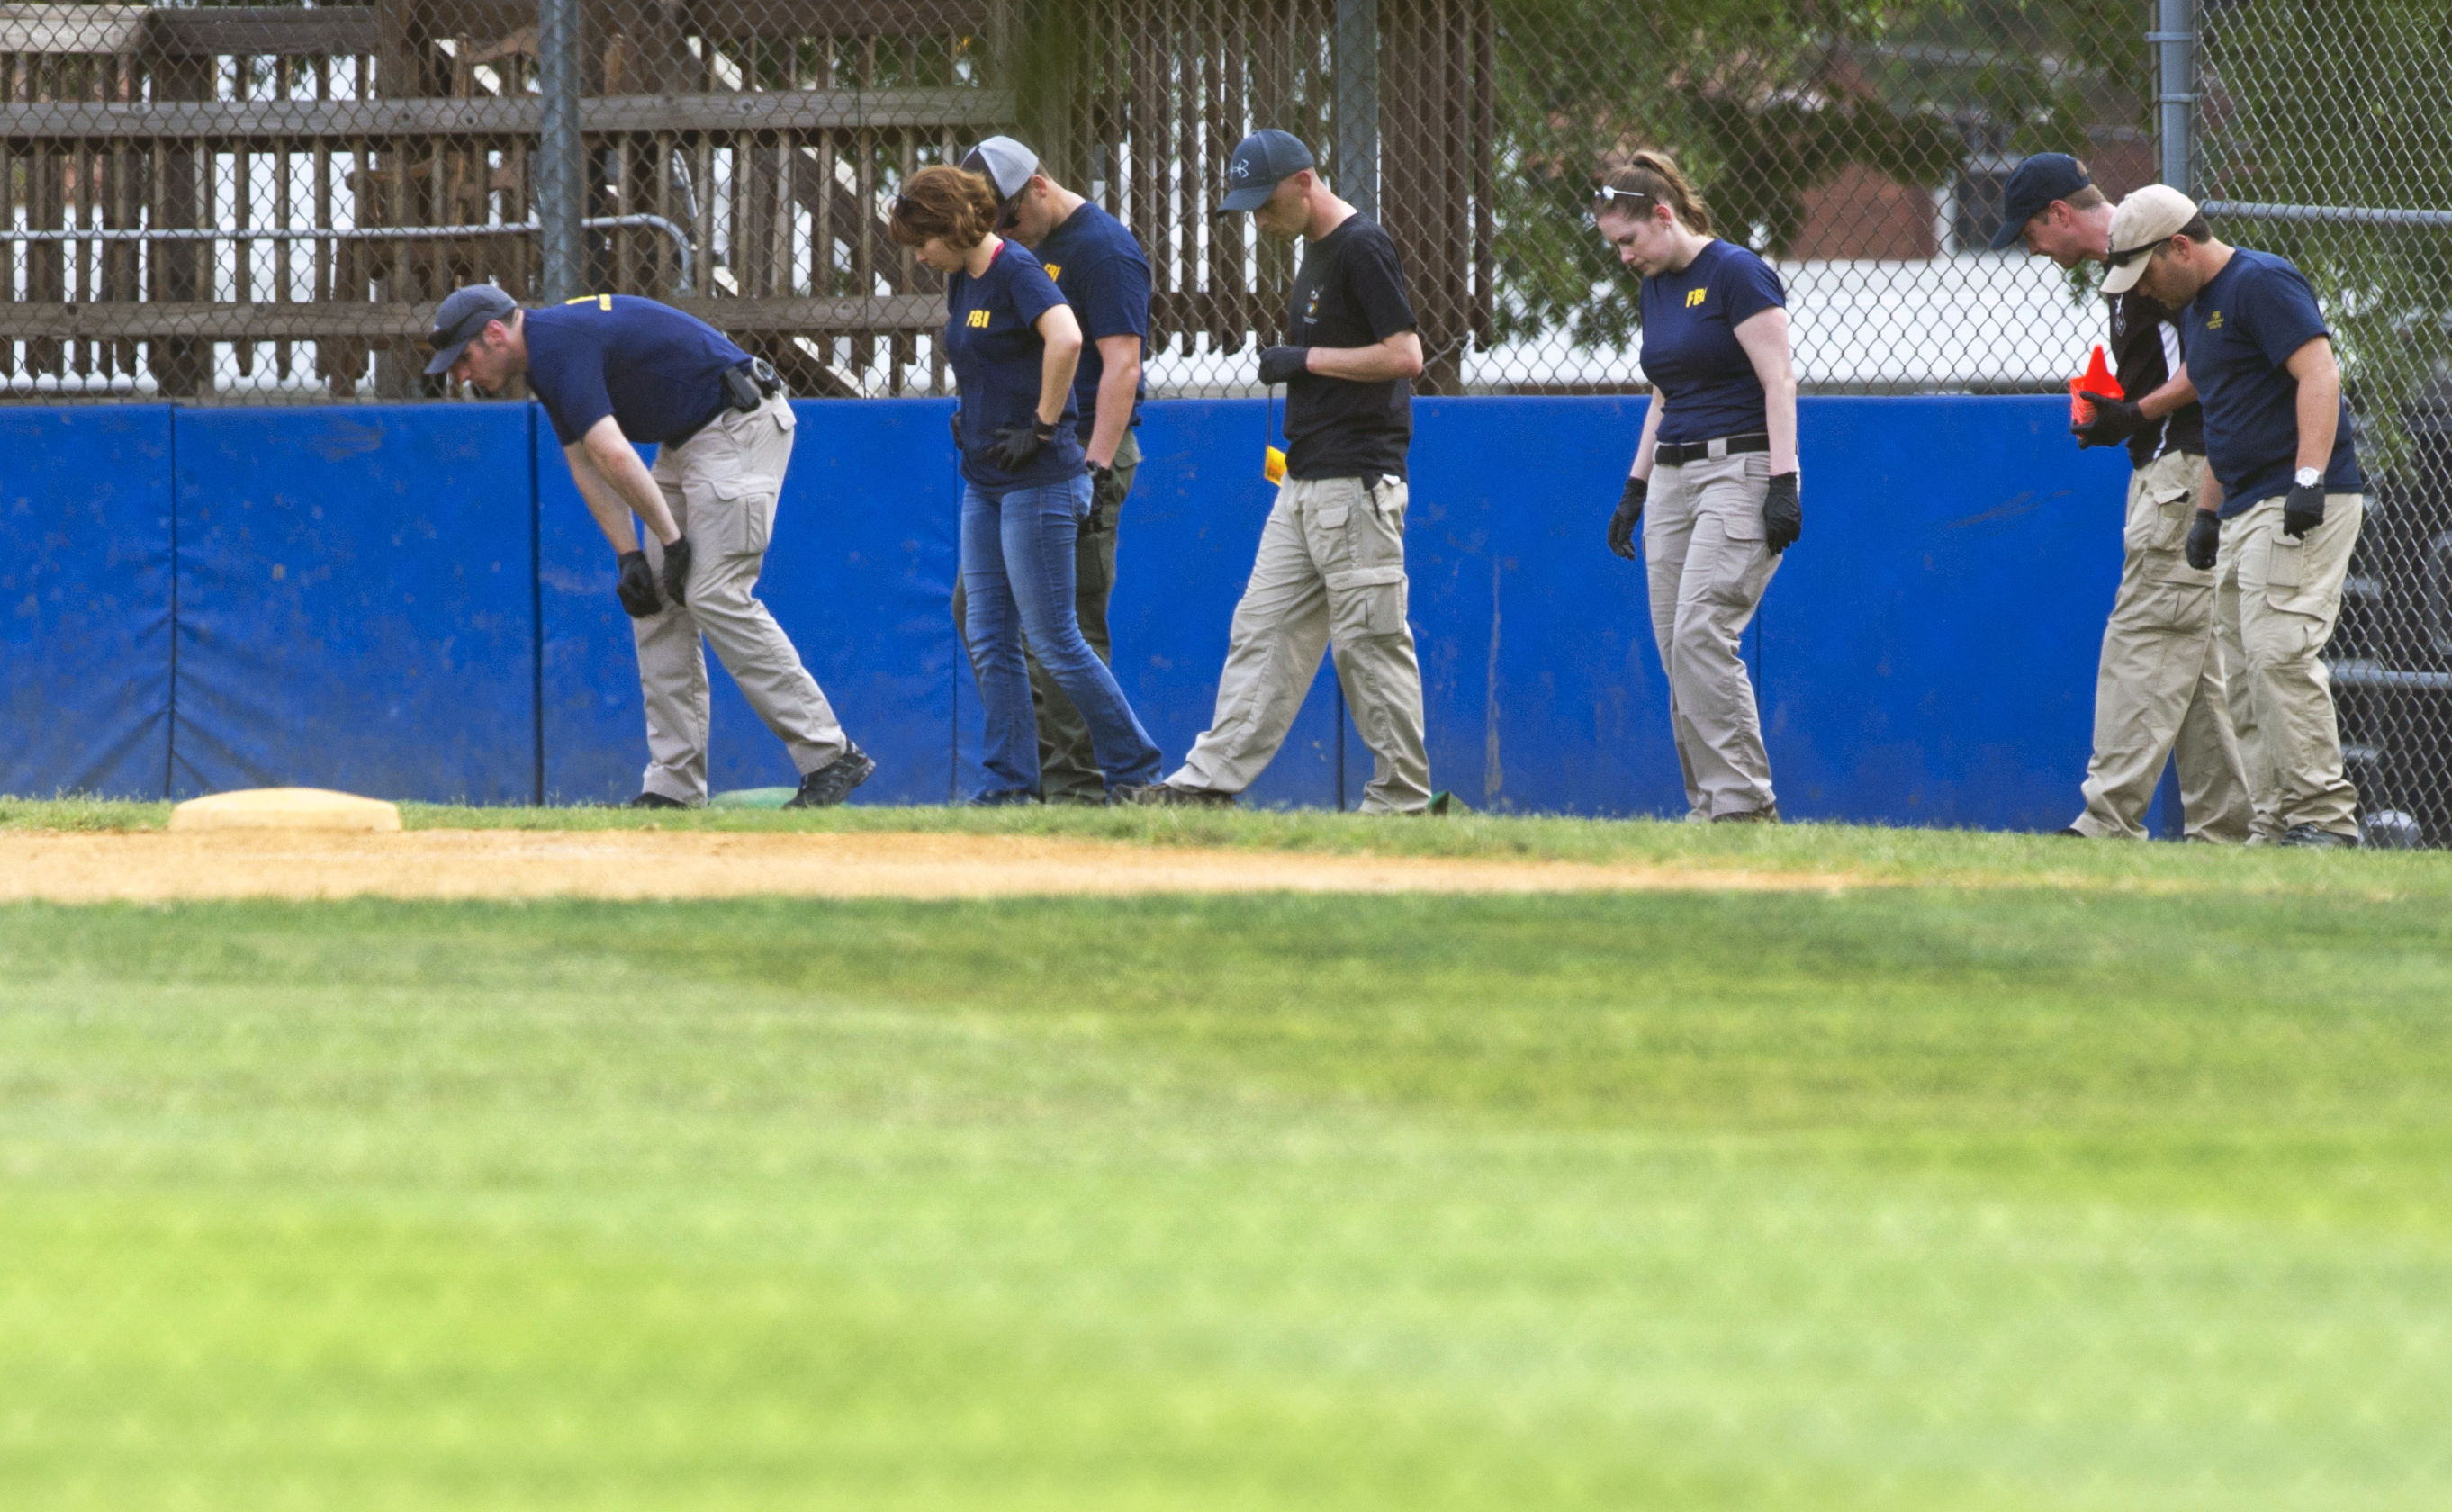 The FBI Evidence Response Team inspects the third base side of the baseball field in Alexandria, Va., June 14, 2017, where a rifle-wielding attacker opened fire on Republican lawmakers at a congressional baseball practice. (Cliff Owen—AP)